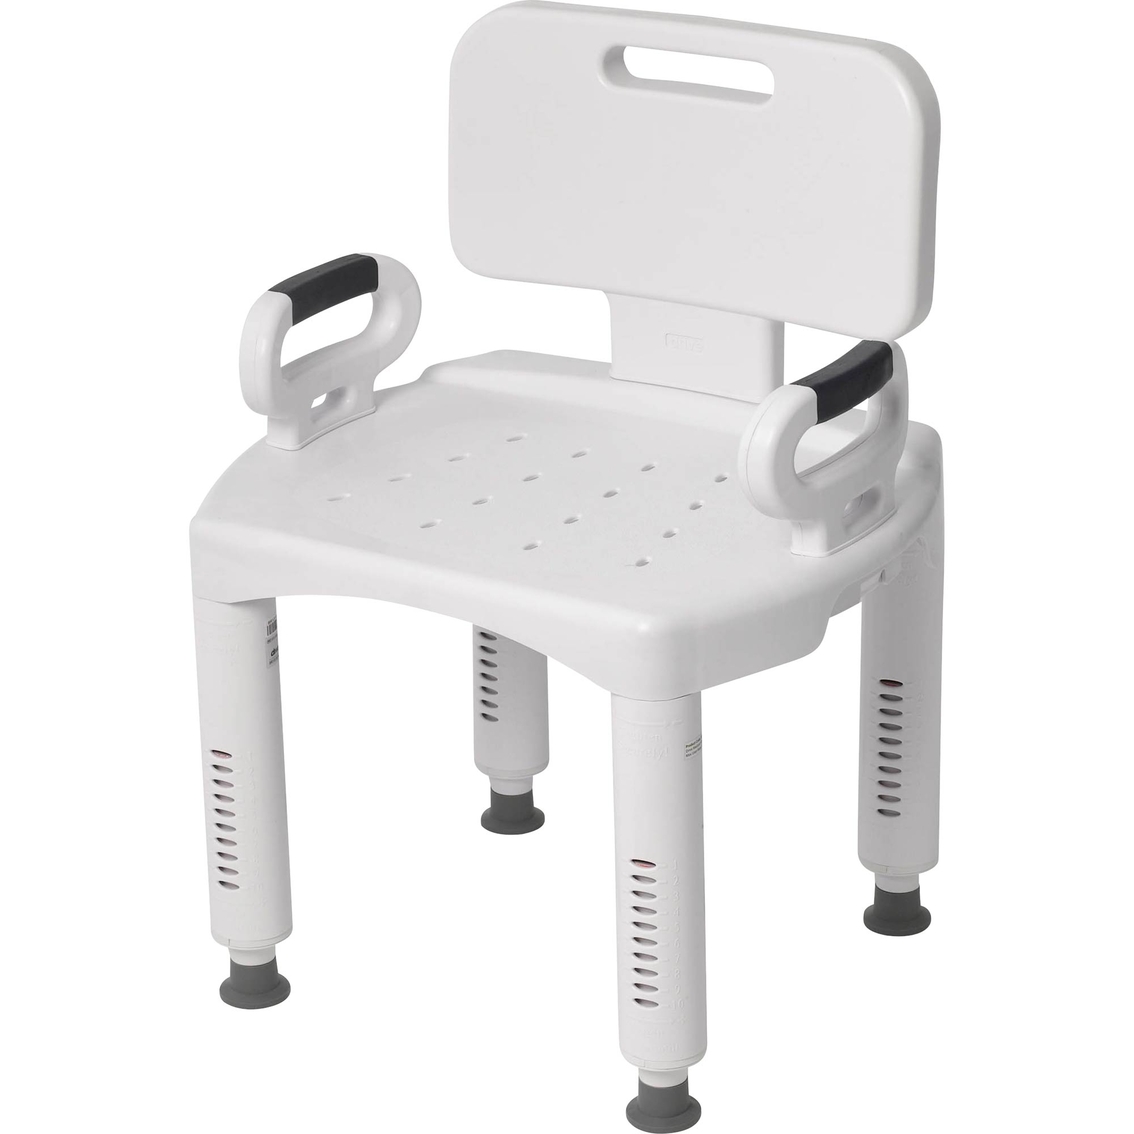 Drive Medical Premium Series Shower Chair with Back and Arms - Image 1 of 4